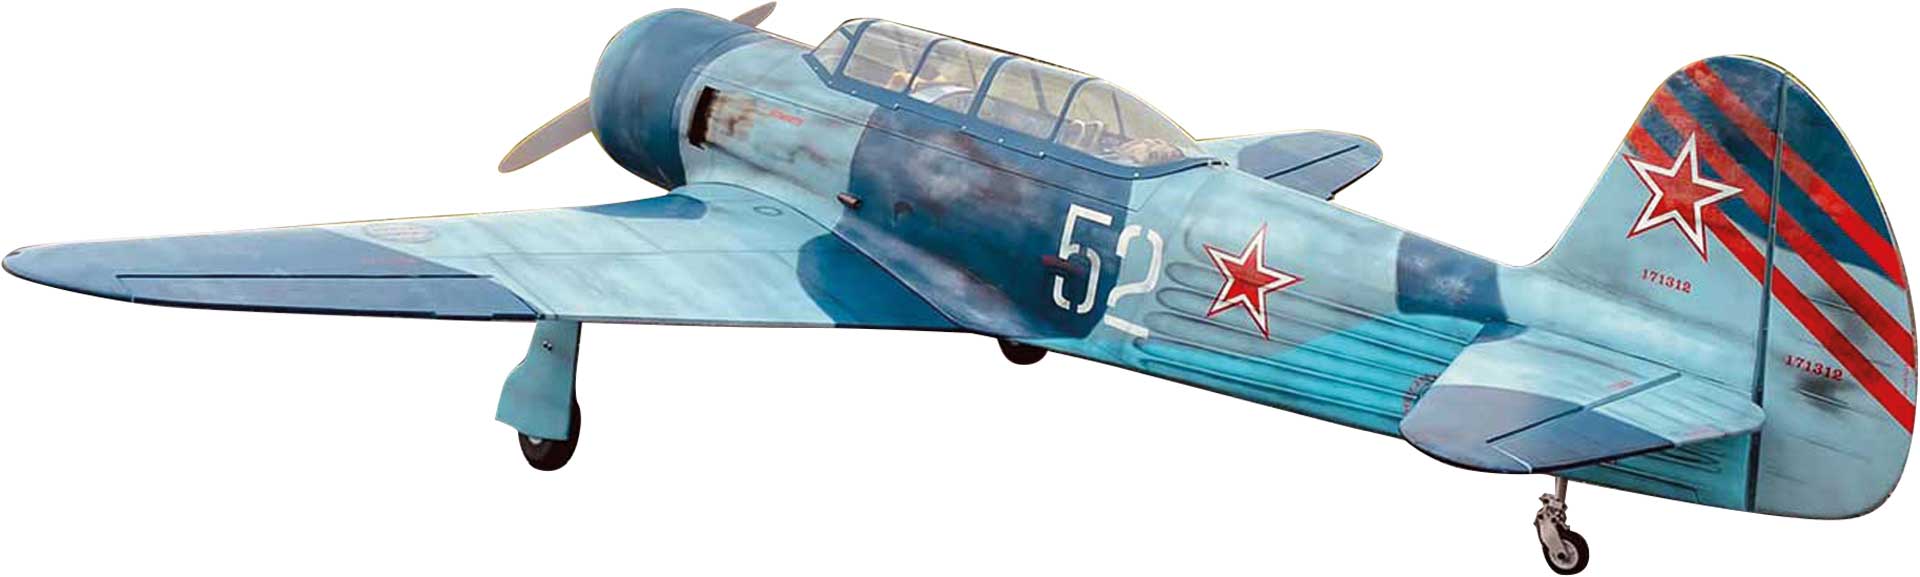 BLACK HORSE Yak 11 / 2350mm ARF Warbird with electric retractable landing gear ( BH187 )